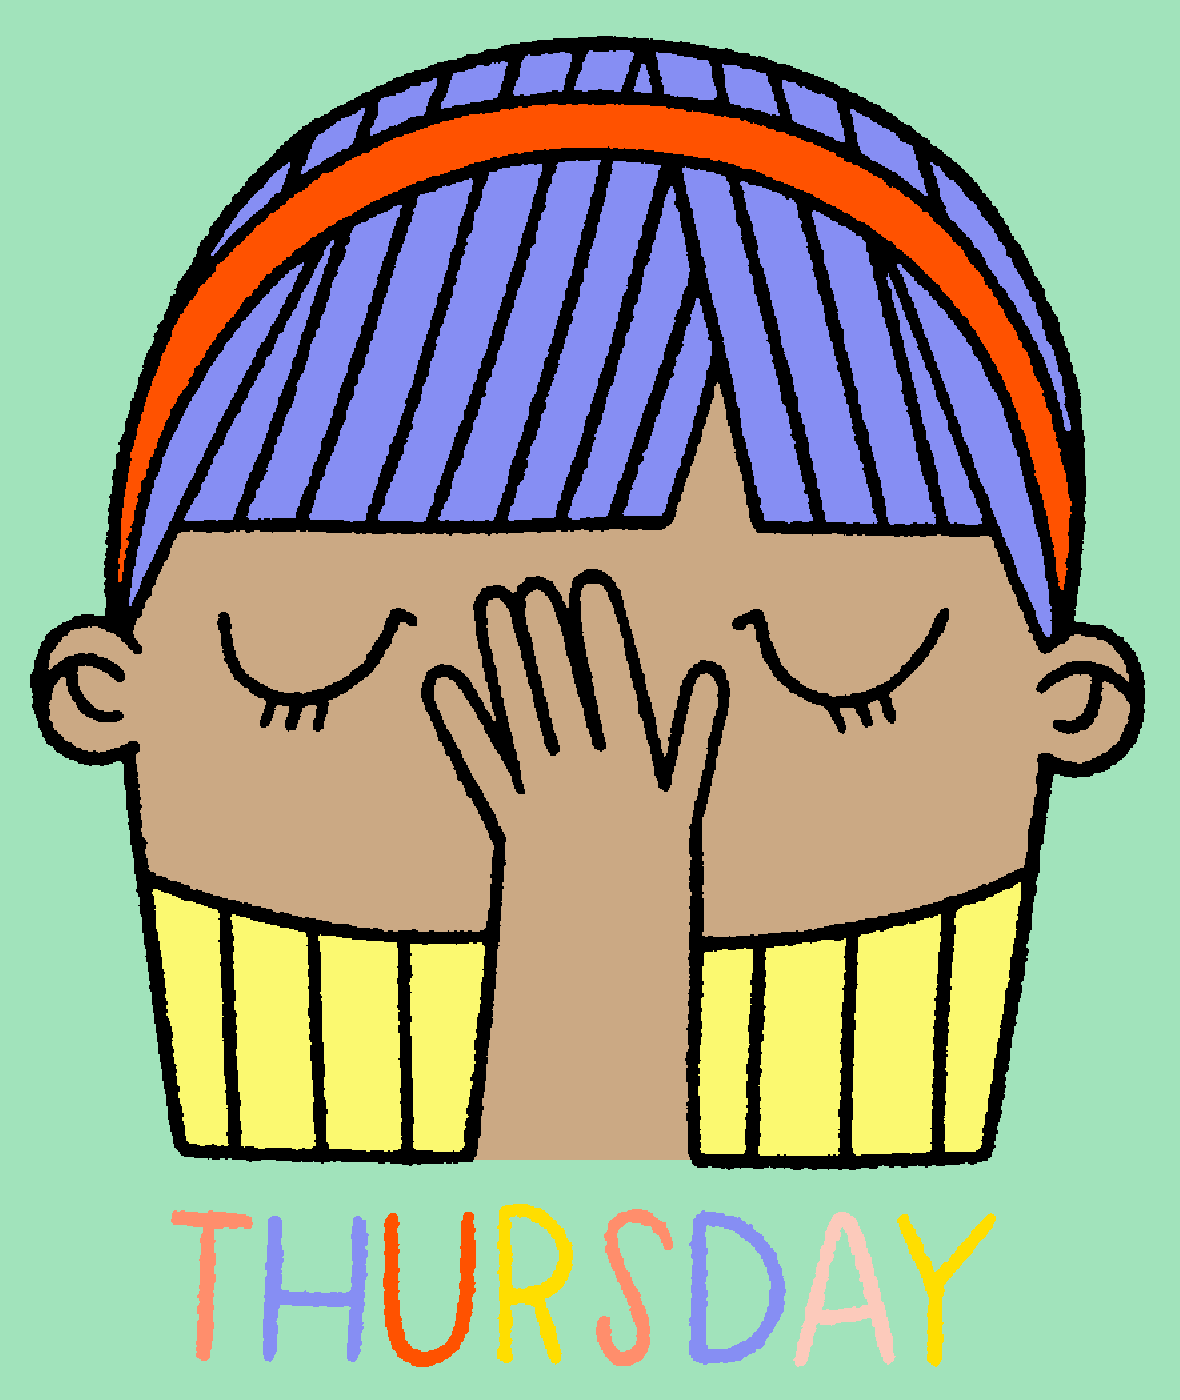 Illustrated gif. A woman has her palm in front of her face and her eyes blink open and closed. Text, "Thursday."